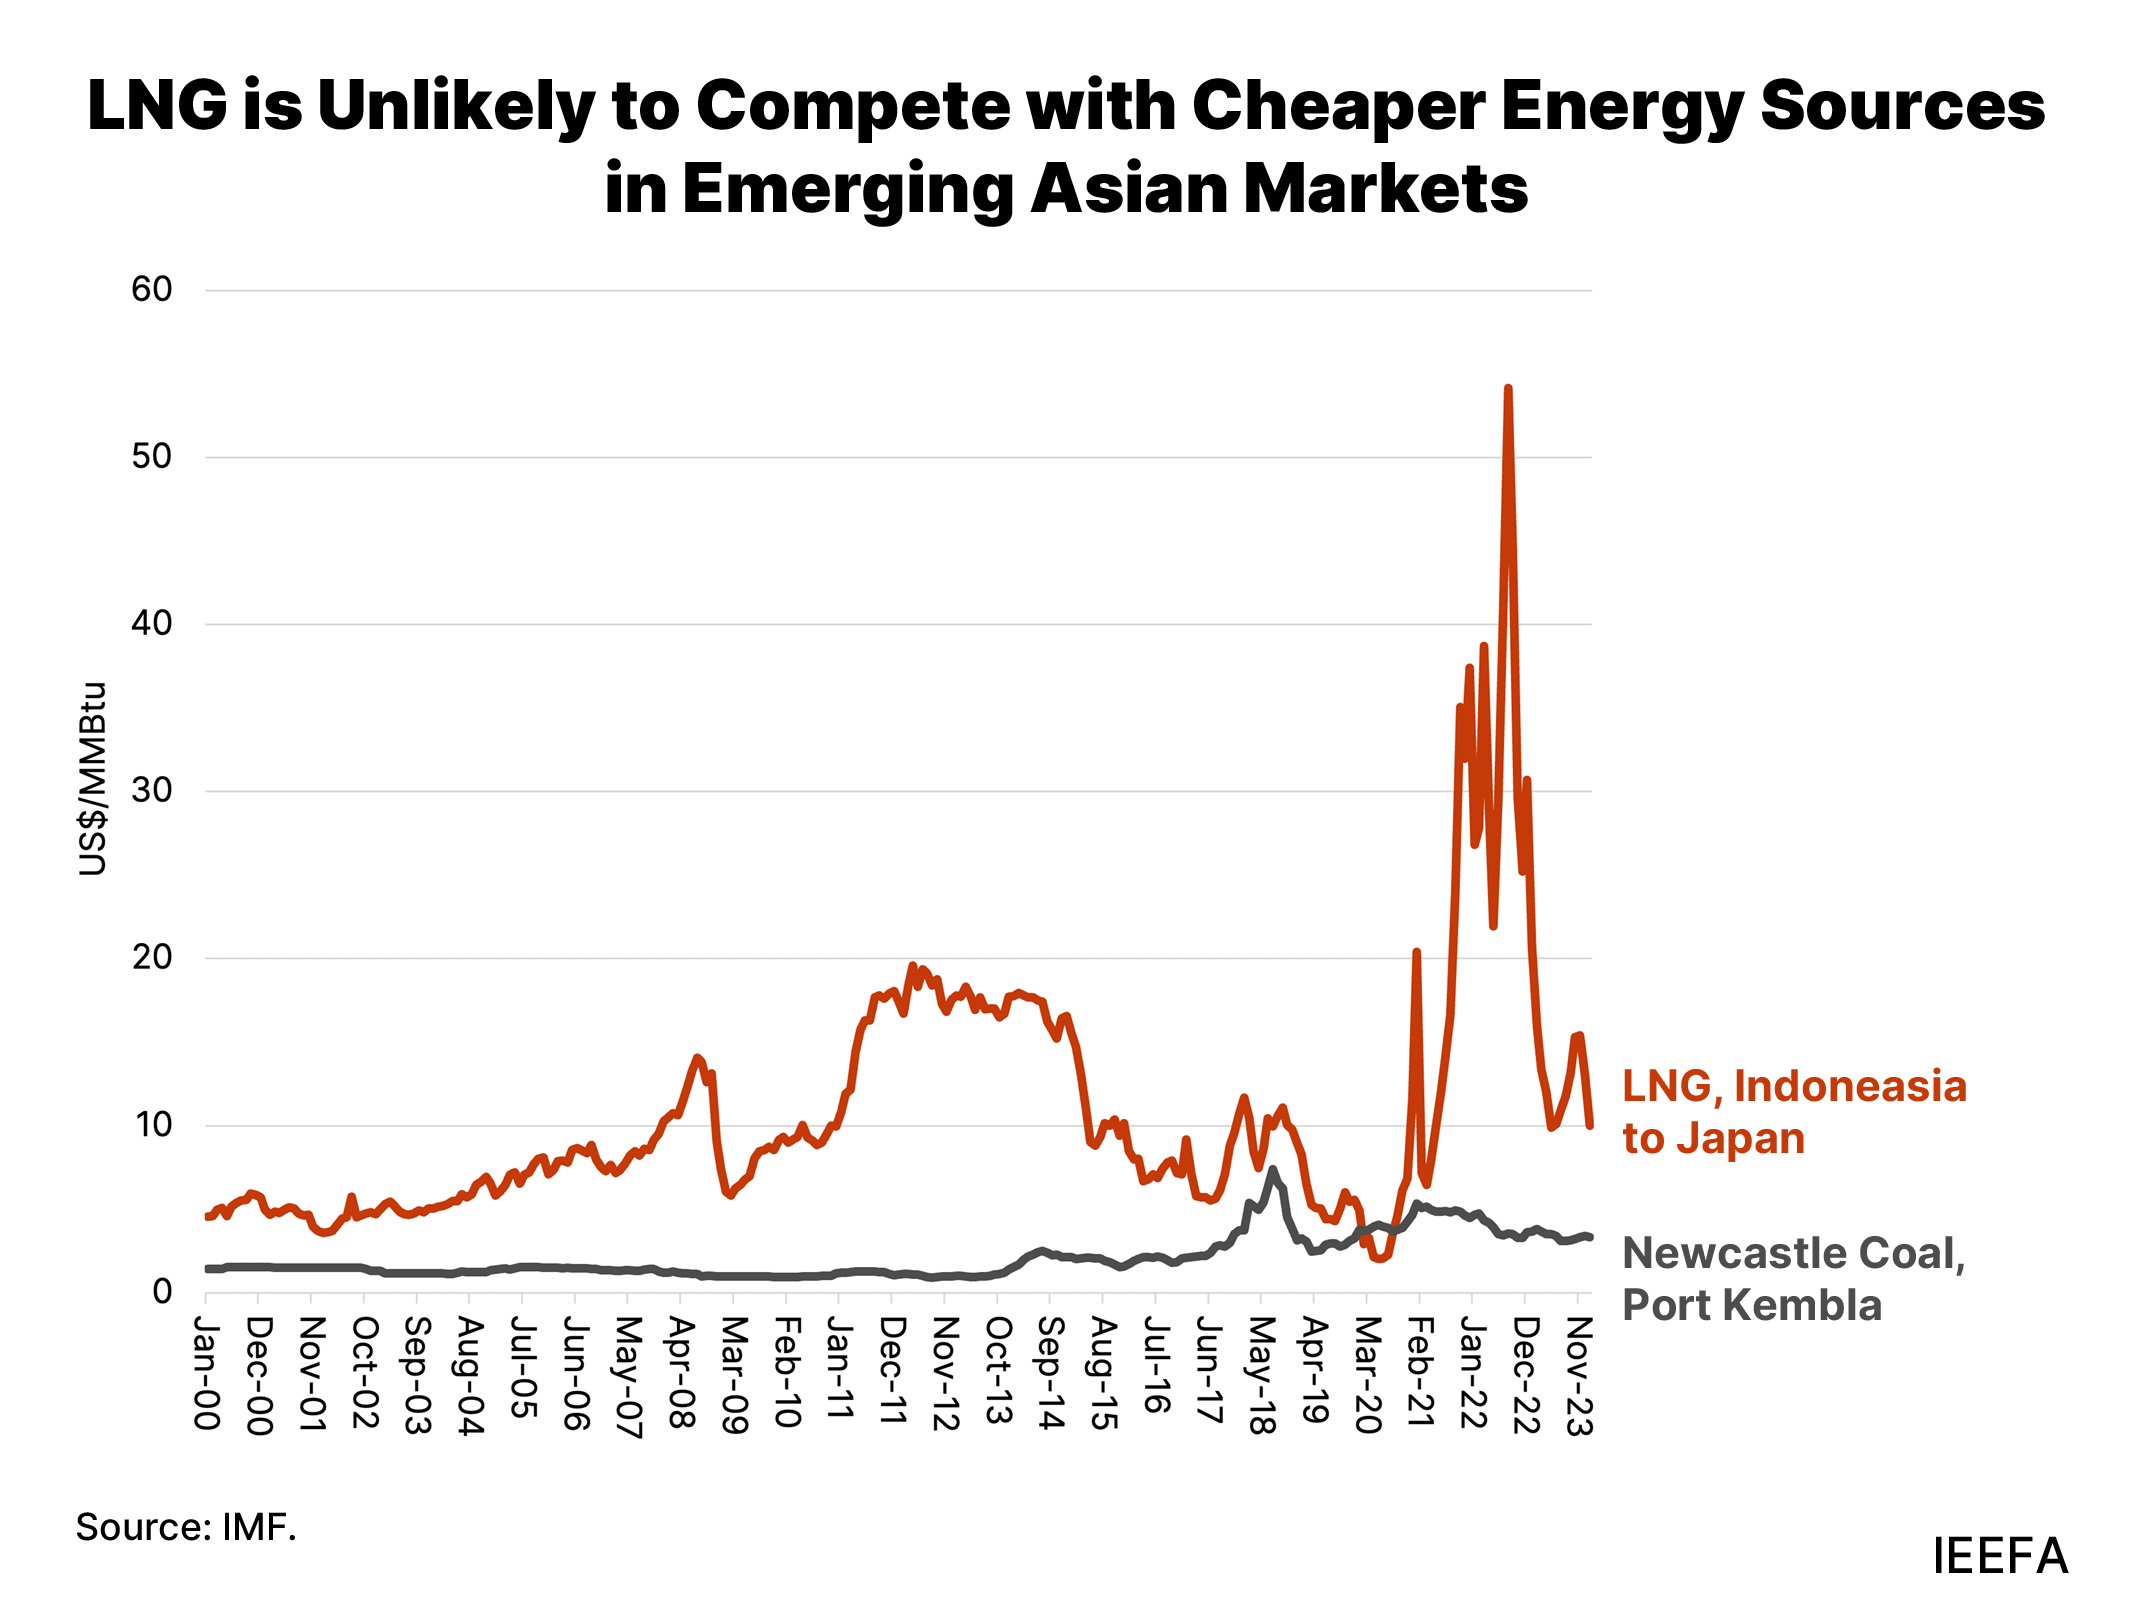 LNG is unlikely to compete with cheaper energy sources in emerging Asian markets